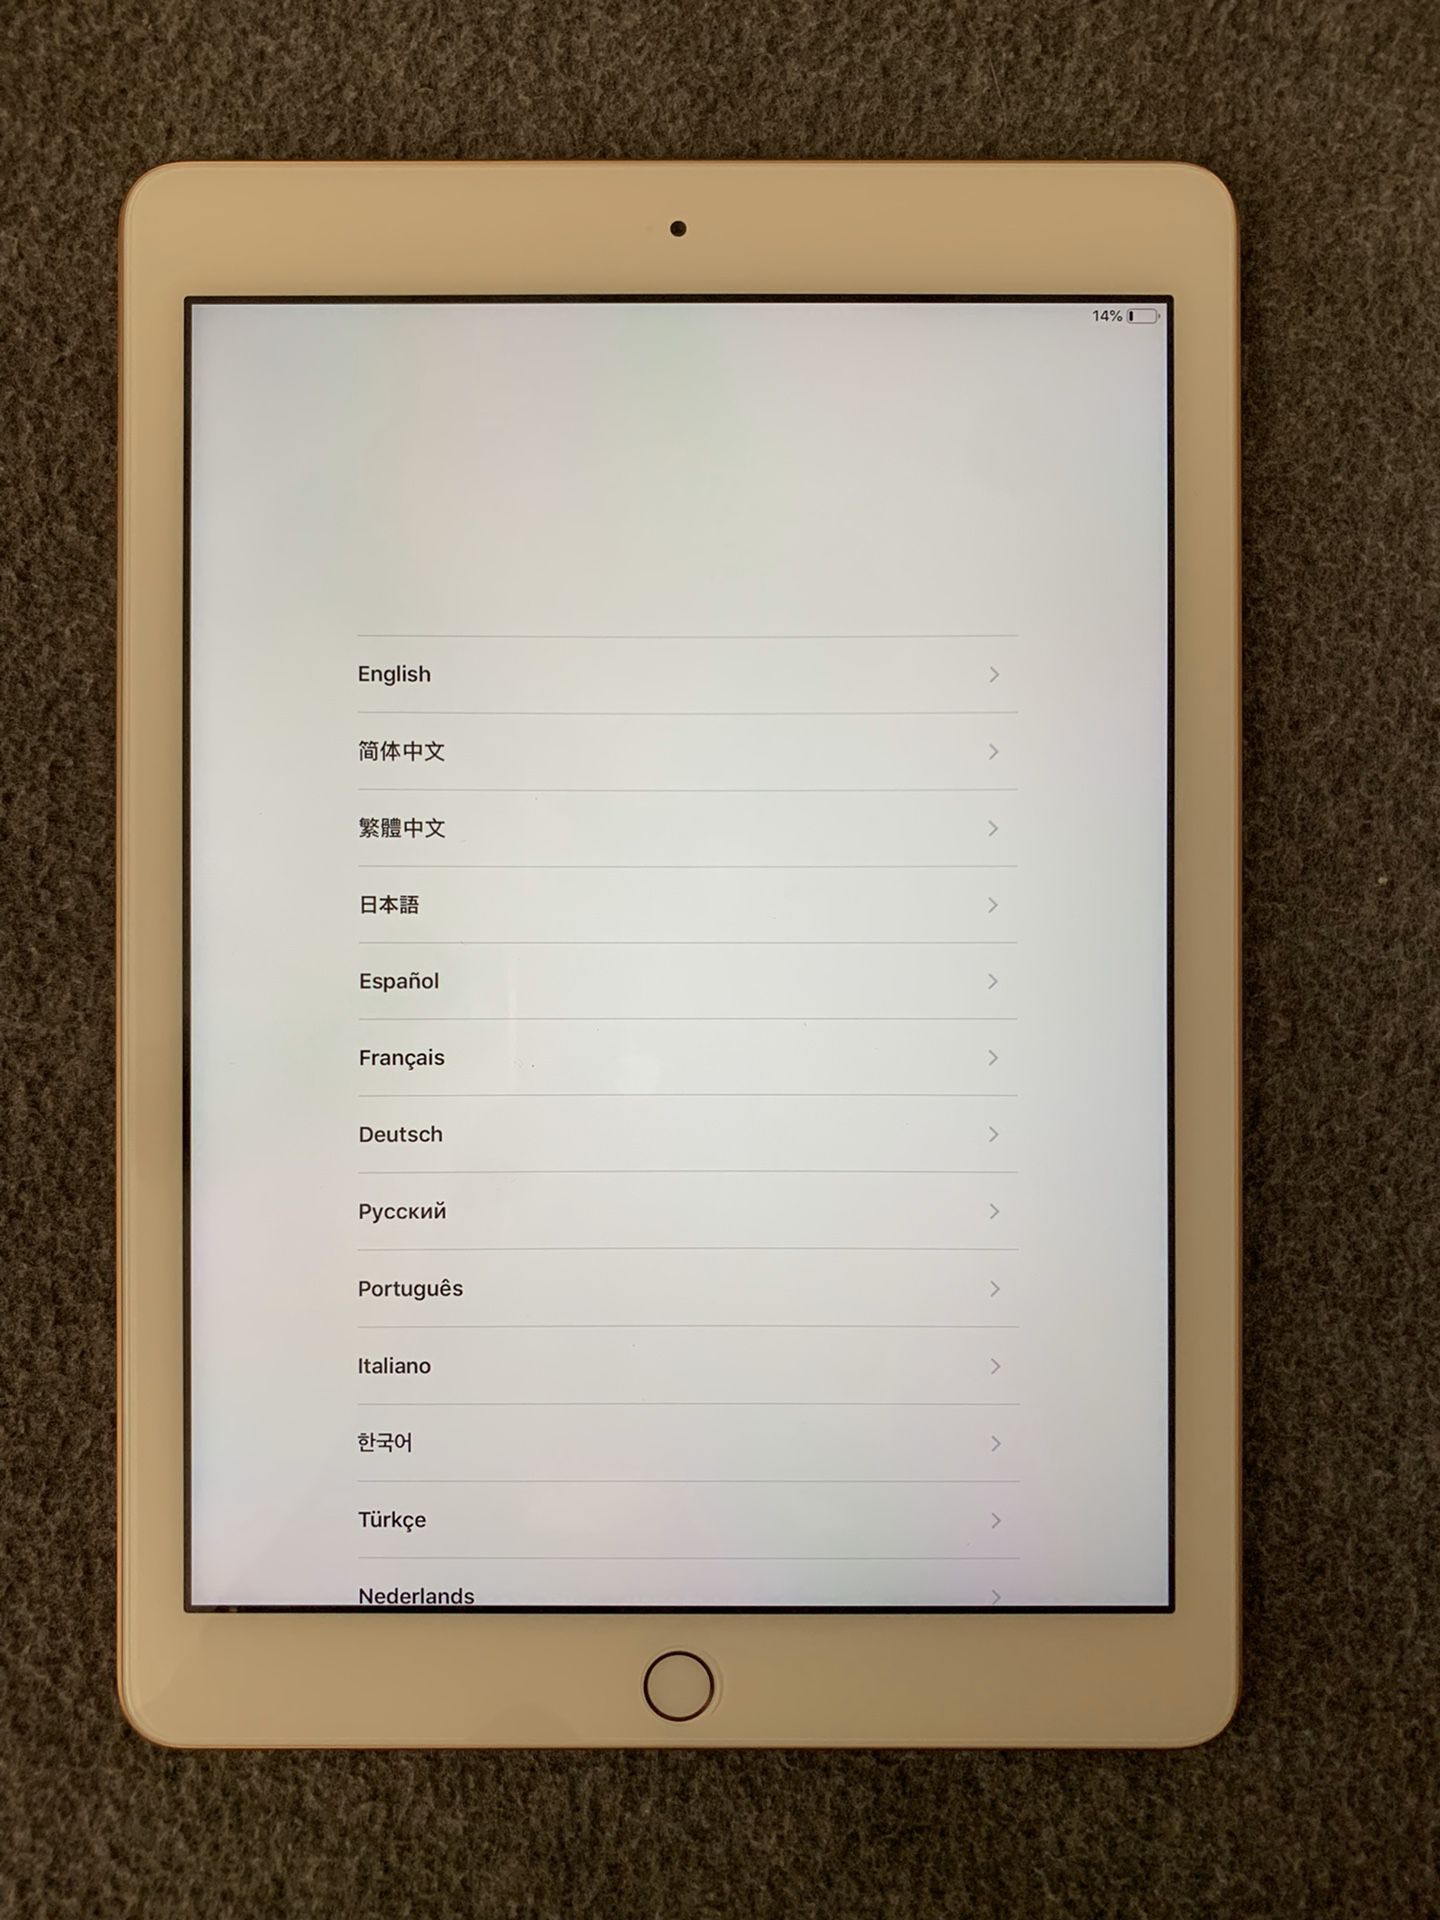 Apple iPad 6th generation (Includes case shown)